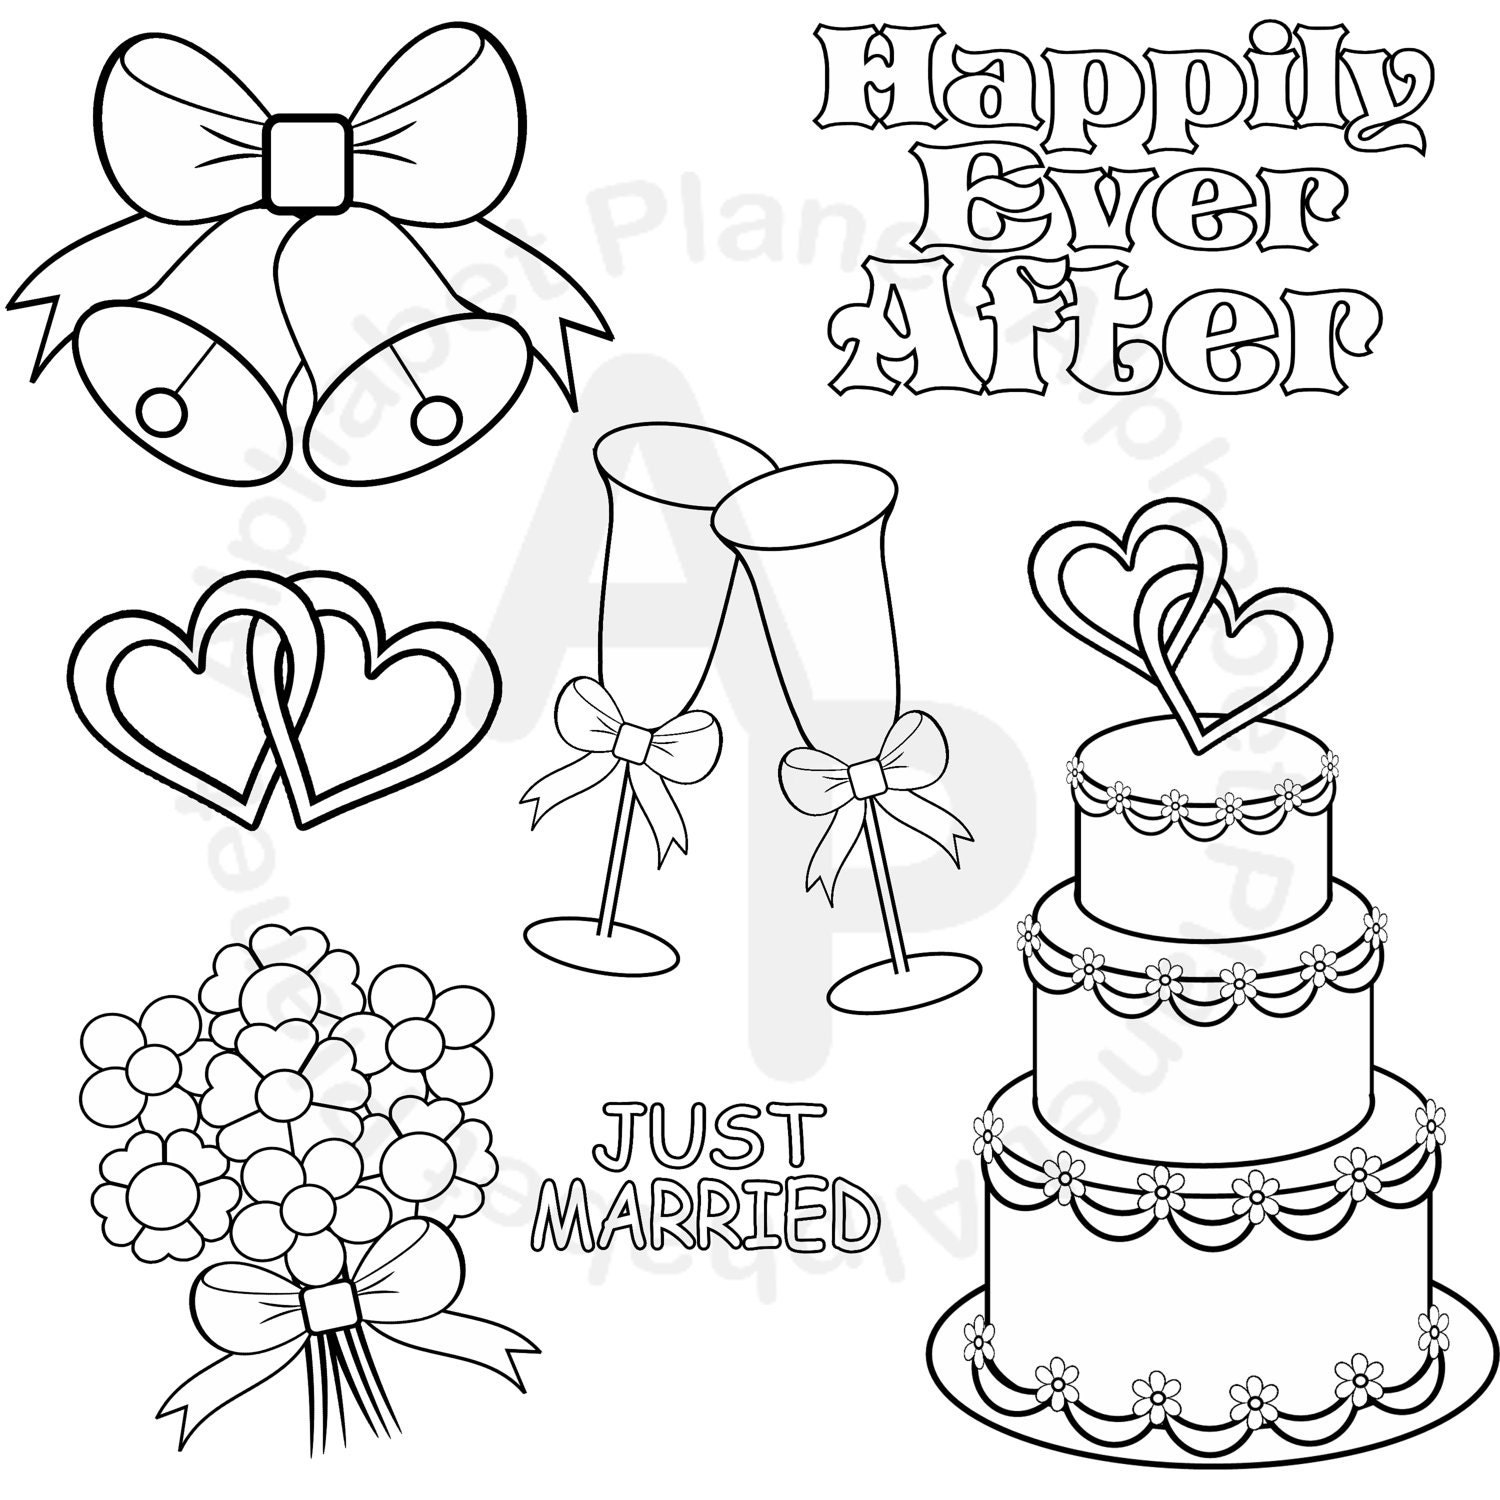 wedding bells clipart black and white free - photo #30